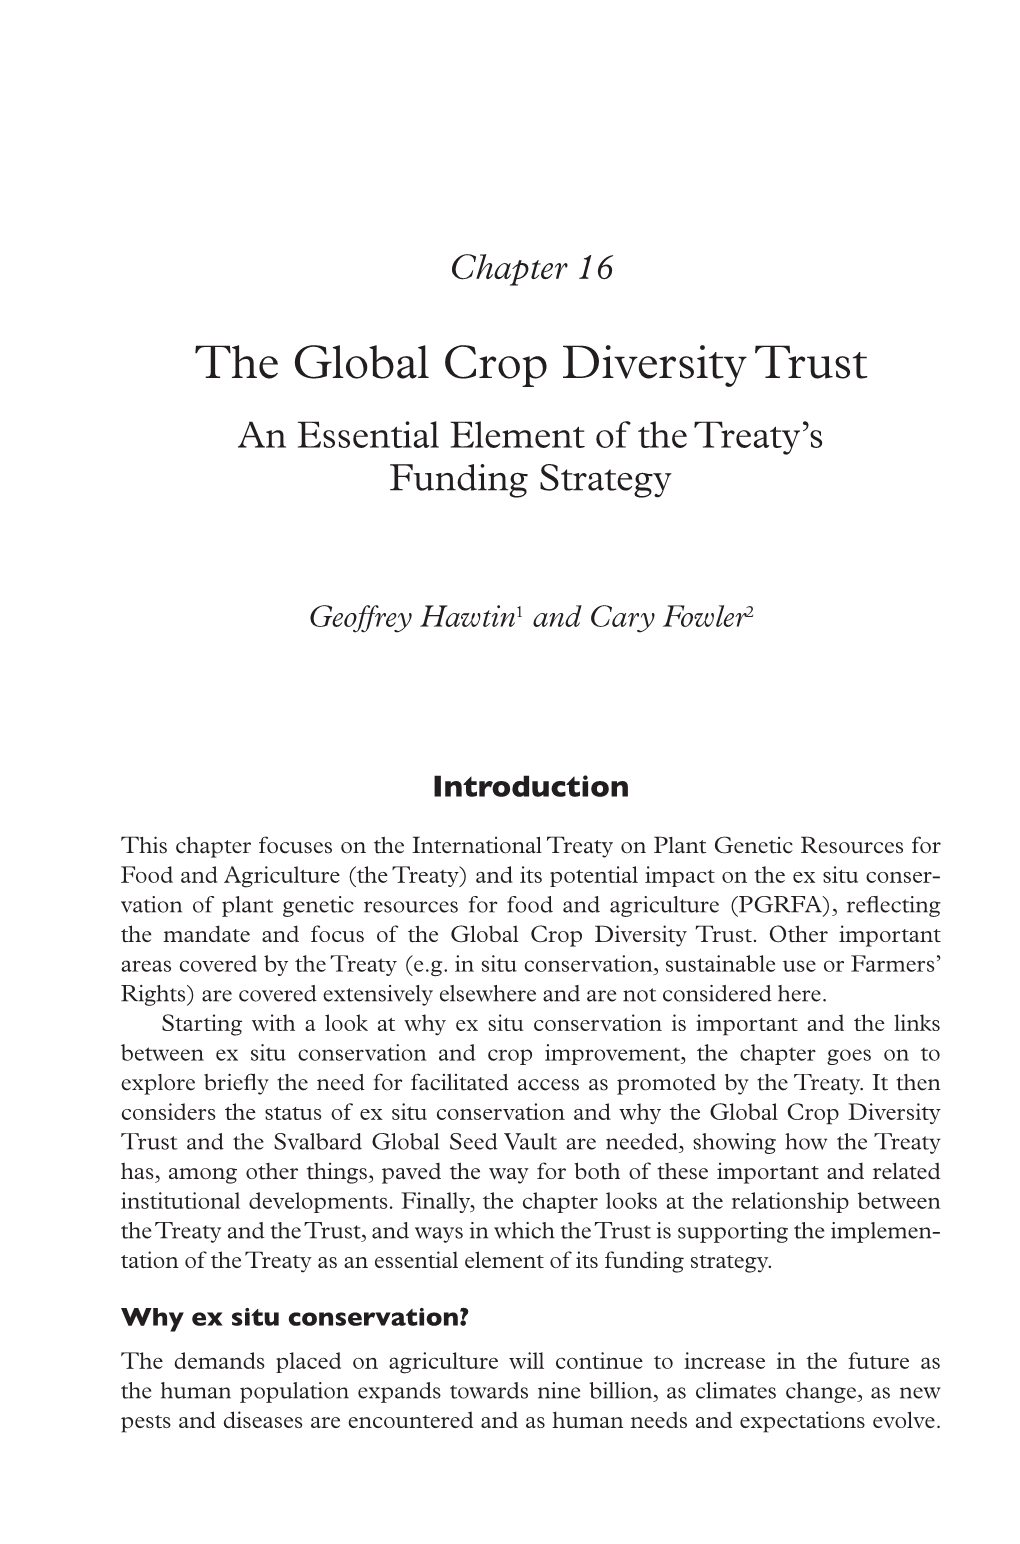 The Global Crop Diversity Trust an Essential Element of the Treaty’S Funding Strategy